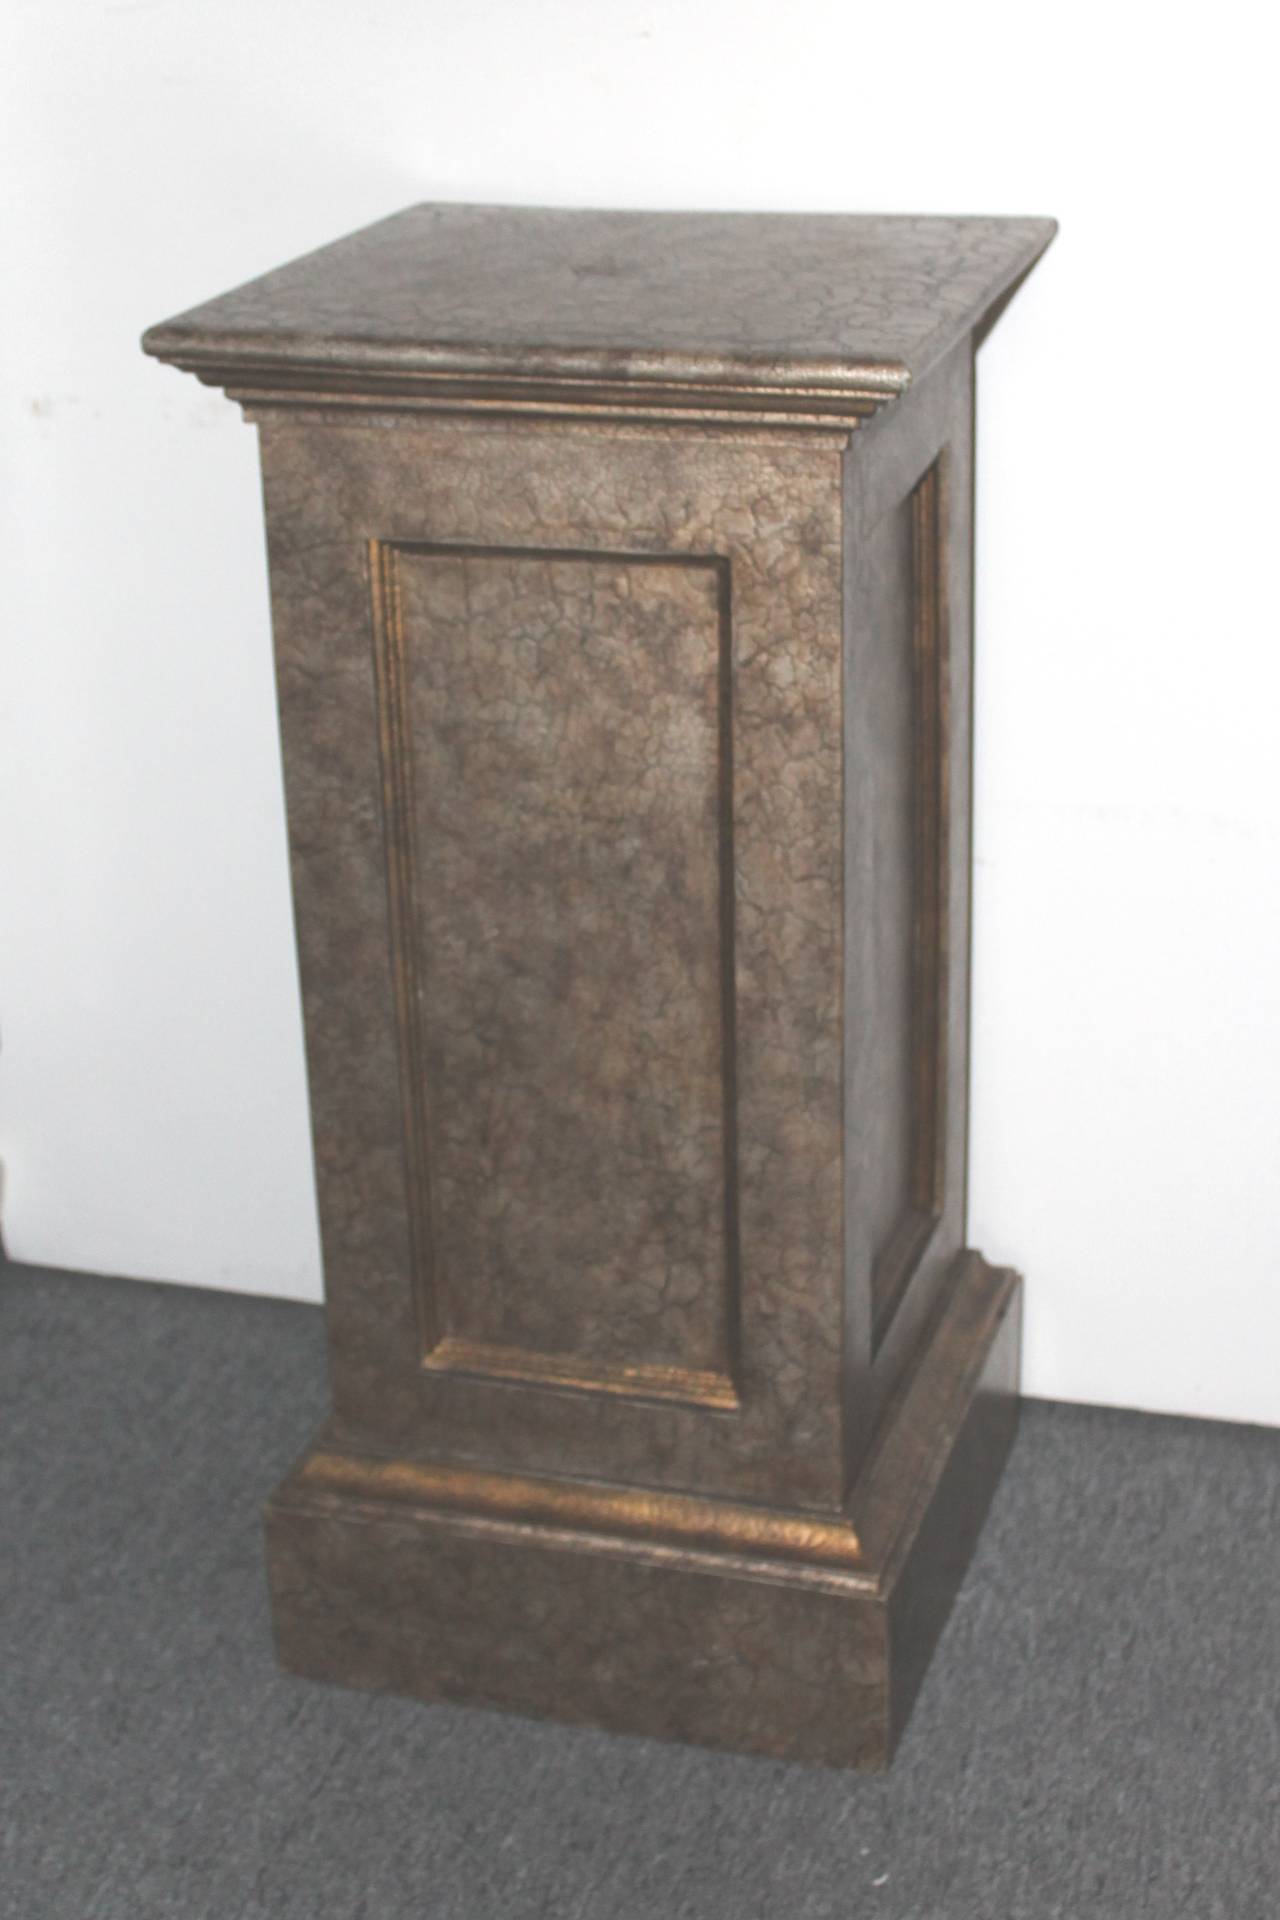 19th century original painted silver or bronze crackle surface pedestal. The condition is amazing and very sturdy. The finish could have been touched up later but looks great. This is a wonderful stand for Folk Art or even modern art.